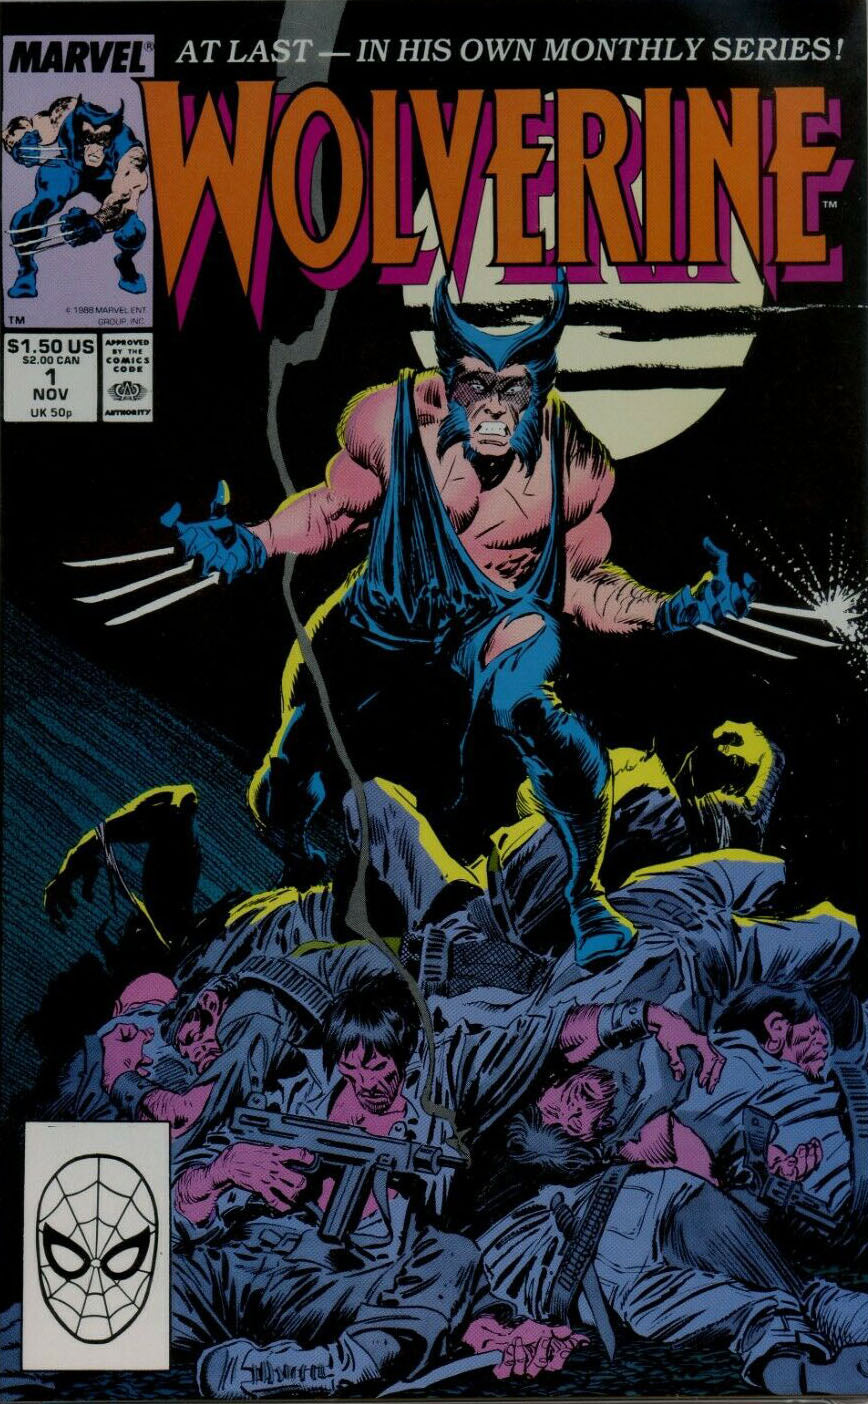 WOLVERINE (1988) #1 (FN) - FIRST APPEARANCE WOLVERINE AS PATCH